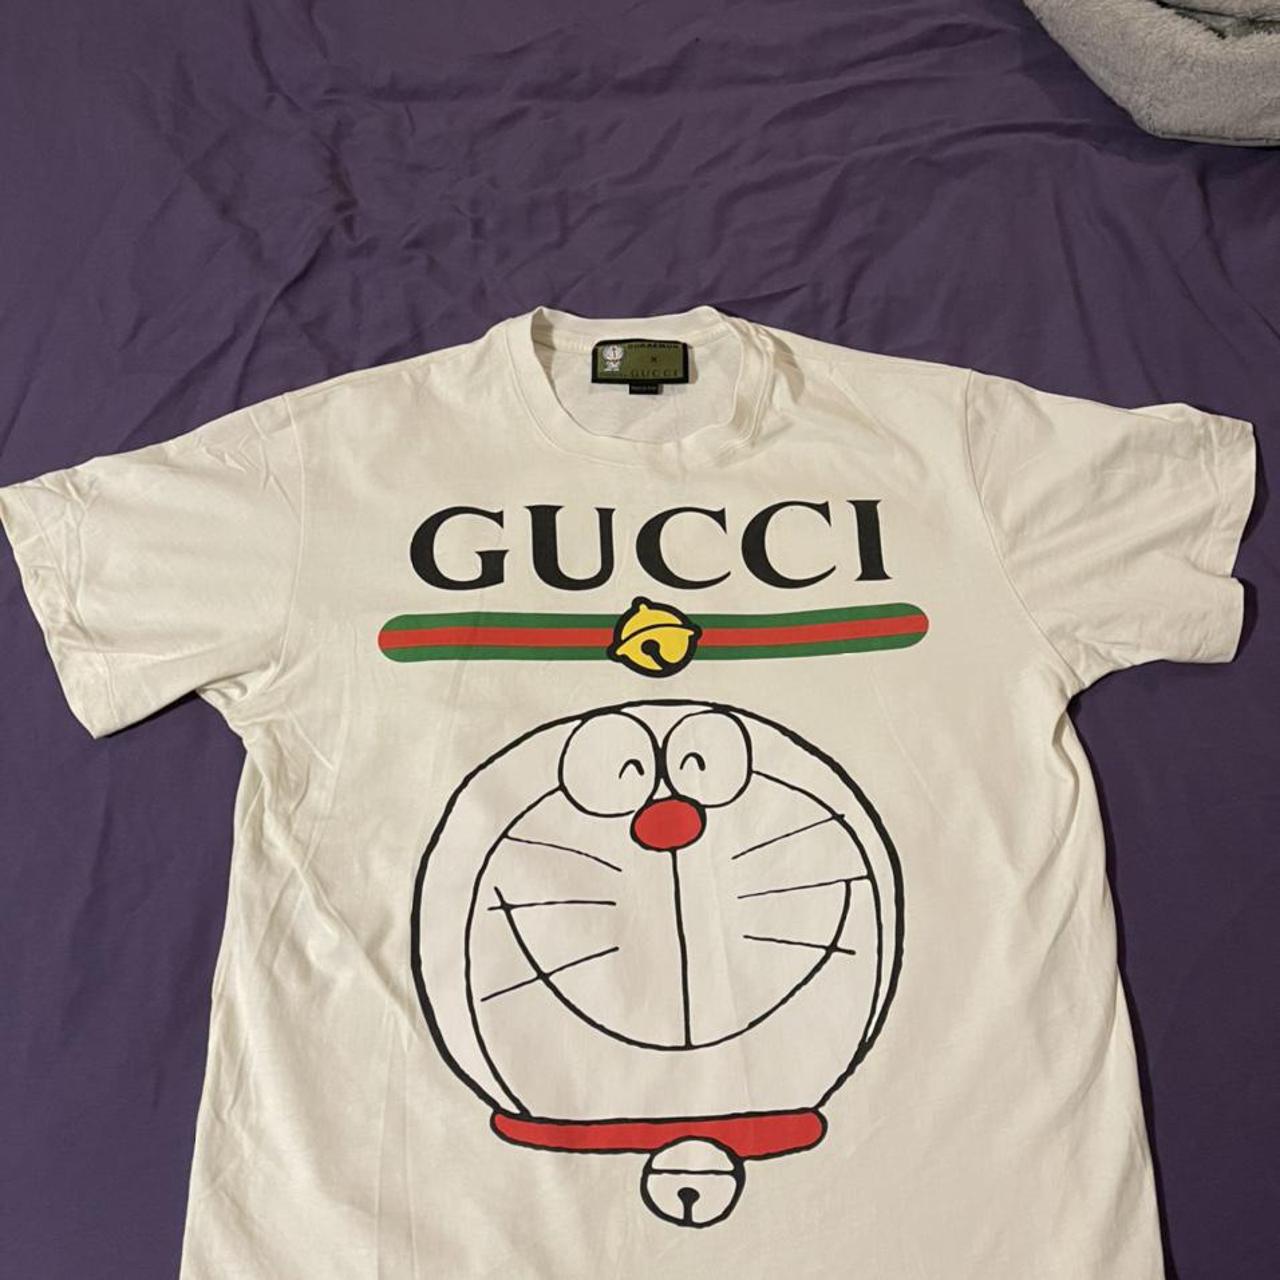 Doraemon x gucci tshirt size M bought from gucci for... - Depop